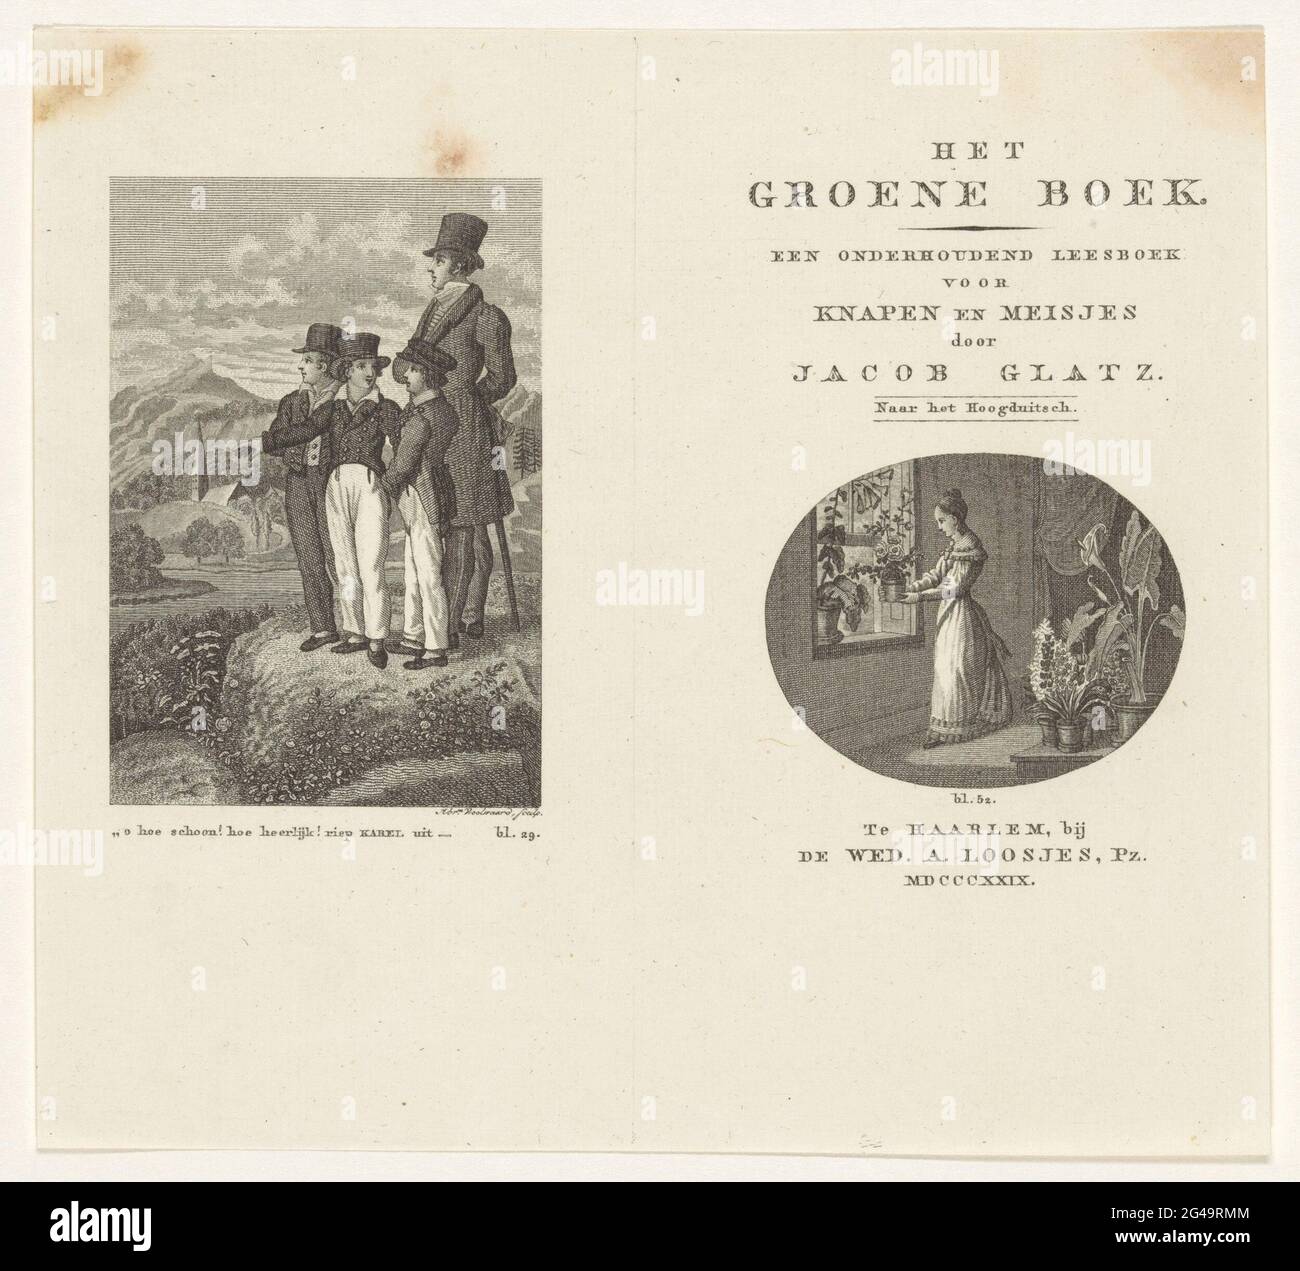 Man and boys on hill and woman in a room with plants; Title page for: Jakob Glatz, the green book, an entertaining reading book for Knapen and girls, 1829. On the left an image of a man and three boys with a top hat, standing on a hill. They overlook a church in the background. On the right an image of a young woman in a room full of flowers and plants. Stock Photo